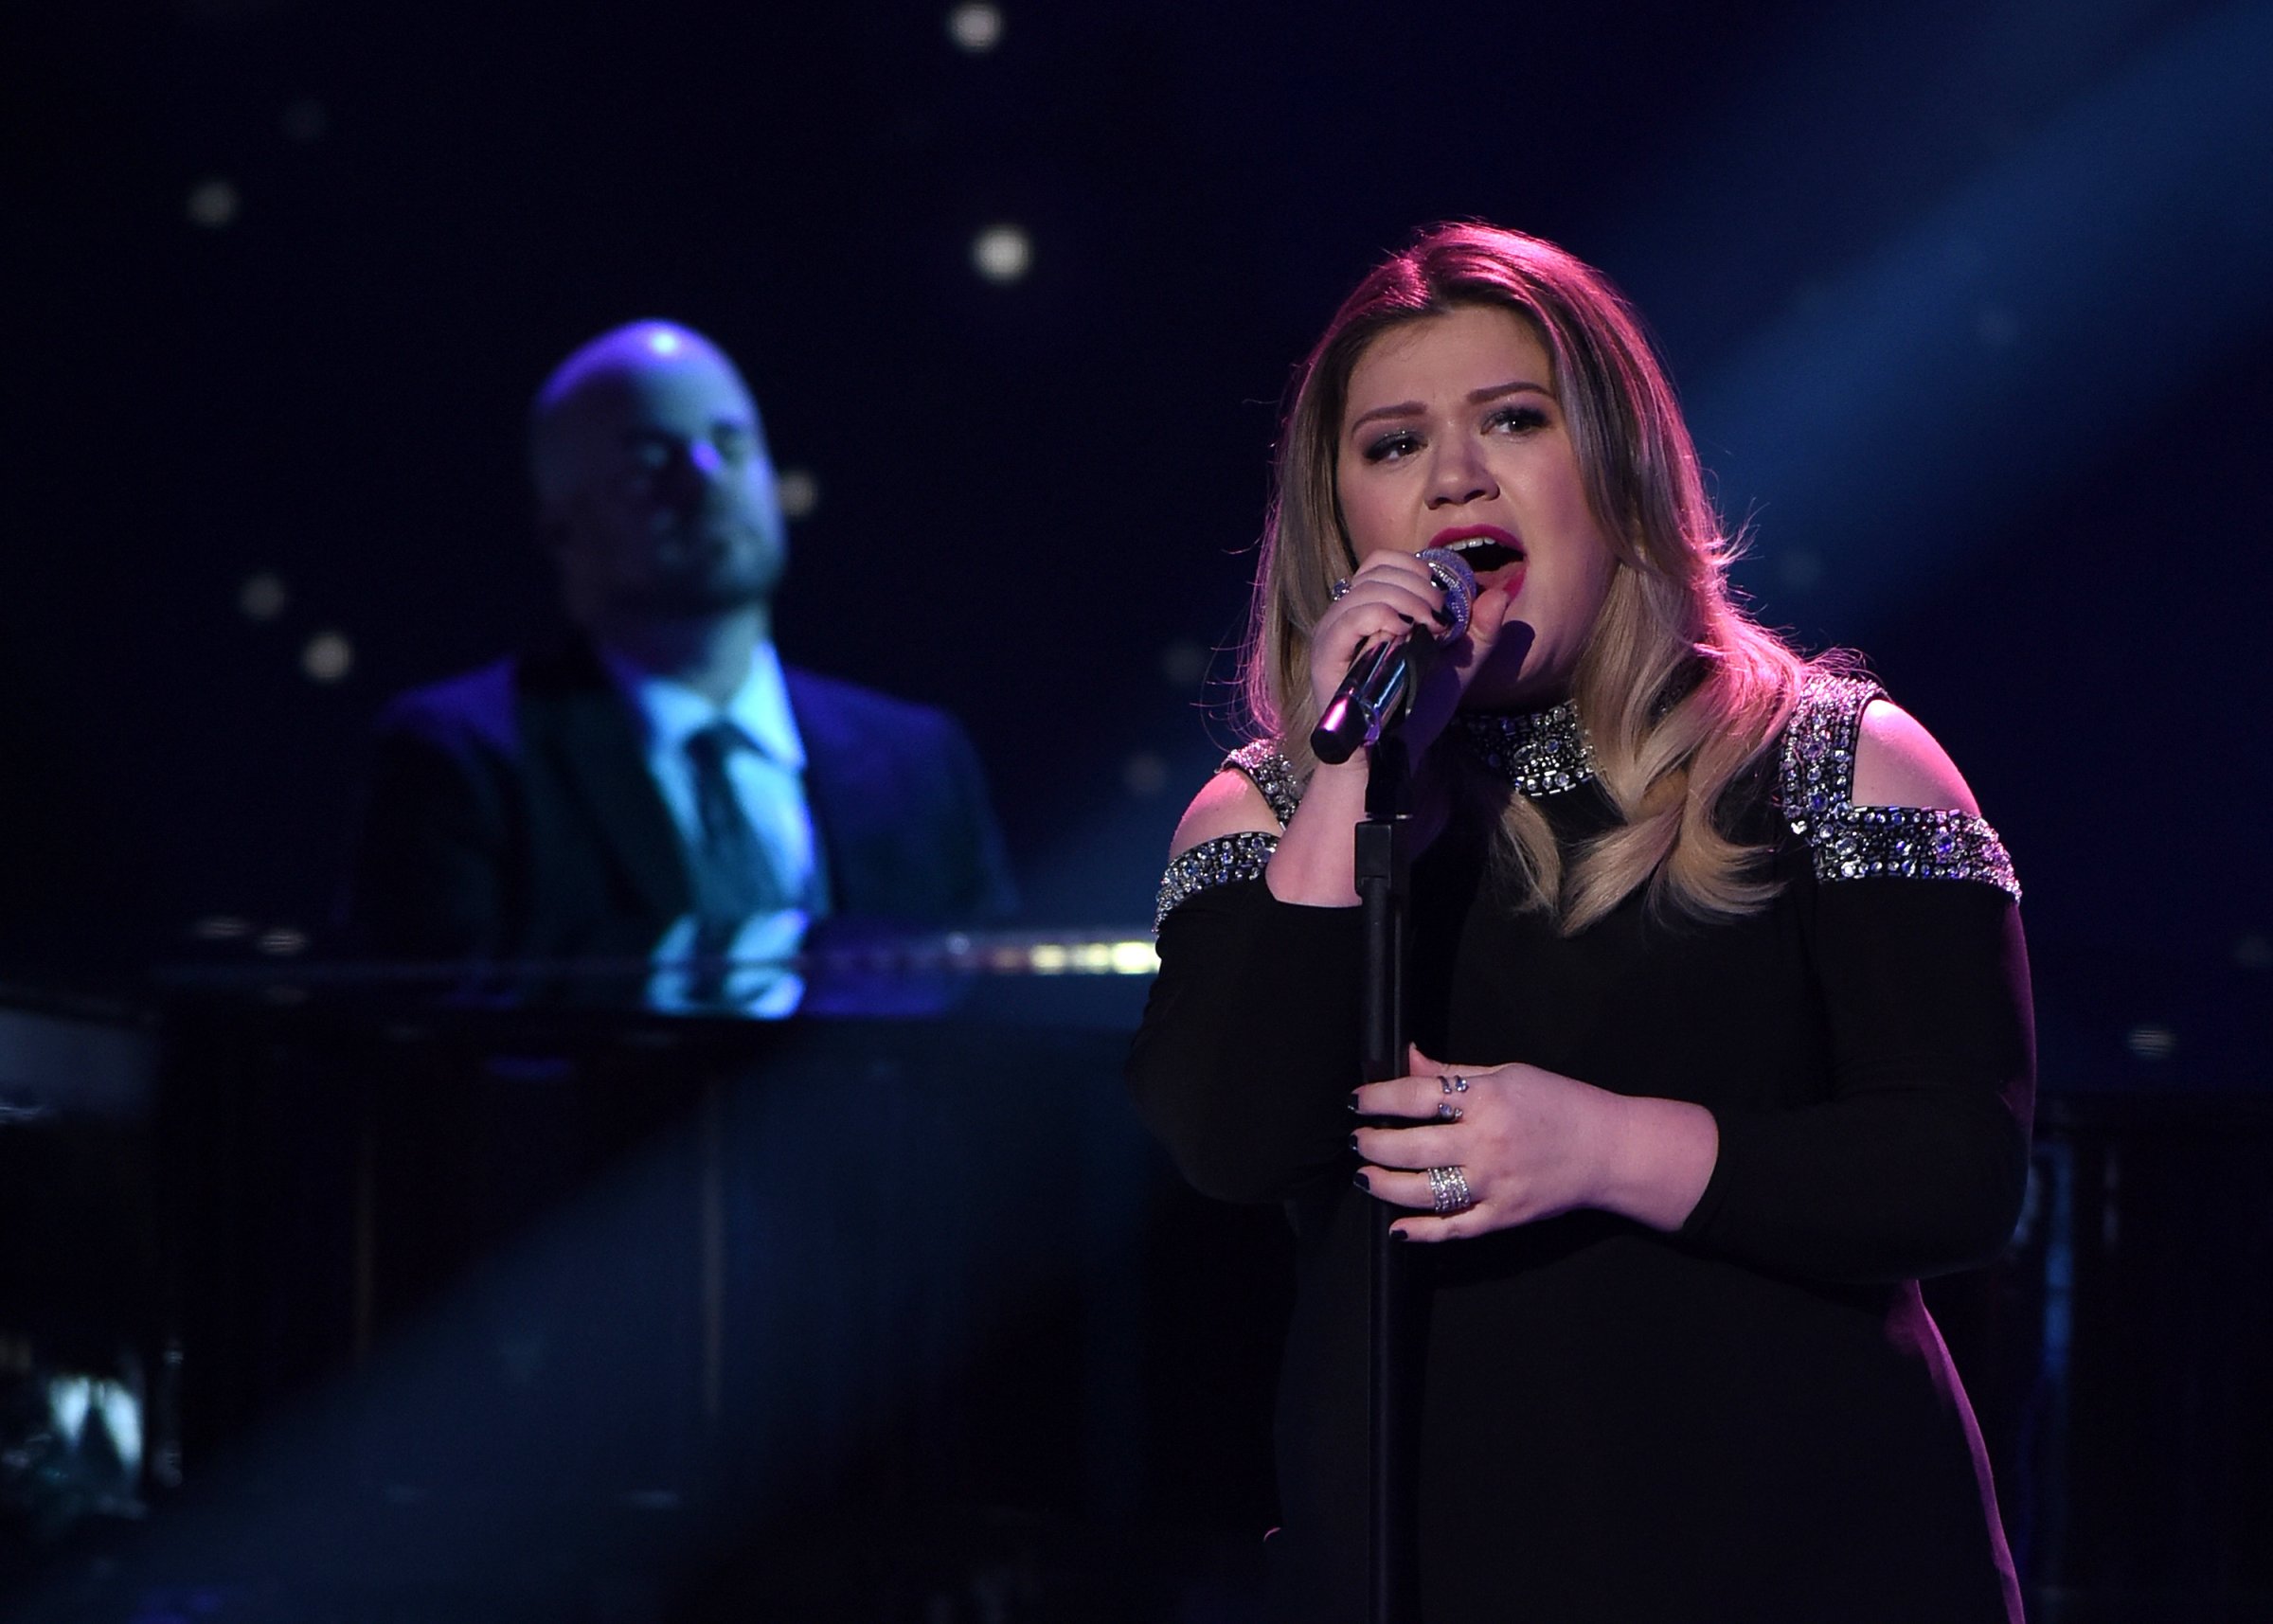 Guest judge and Season 1 winner Kelly Clarkson performs onstage at FOX's American Idol Season 15 on February 25, 2016 in Hollywood, California.